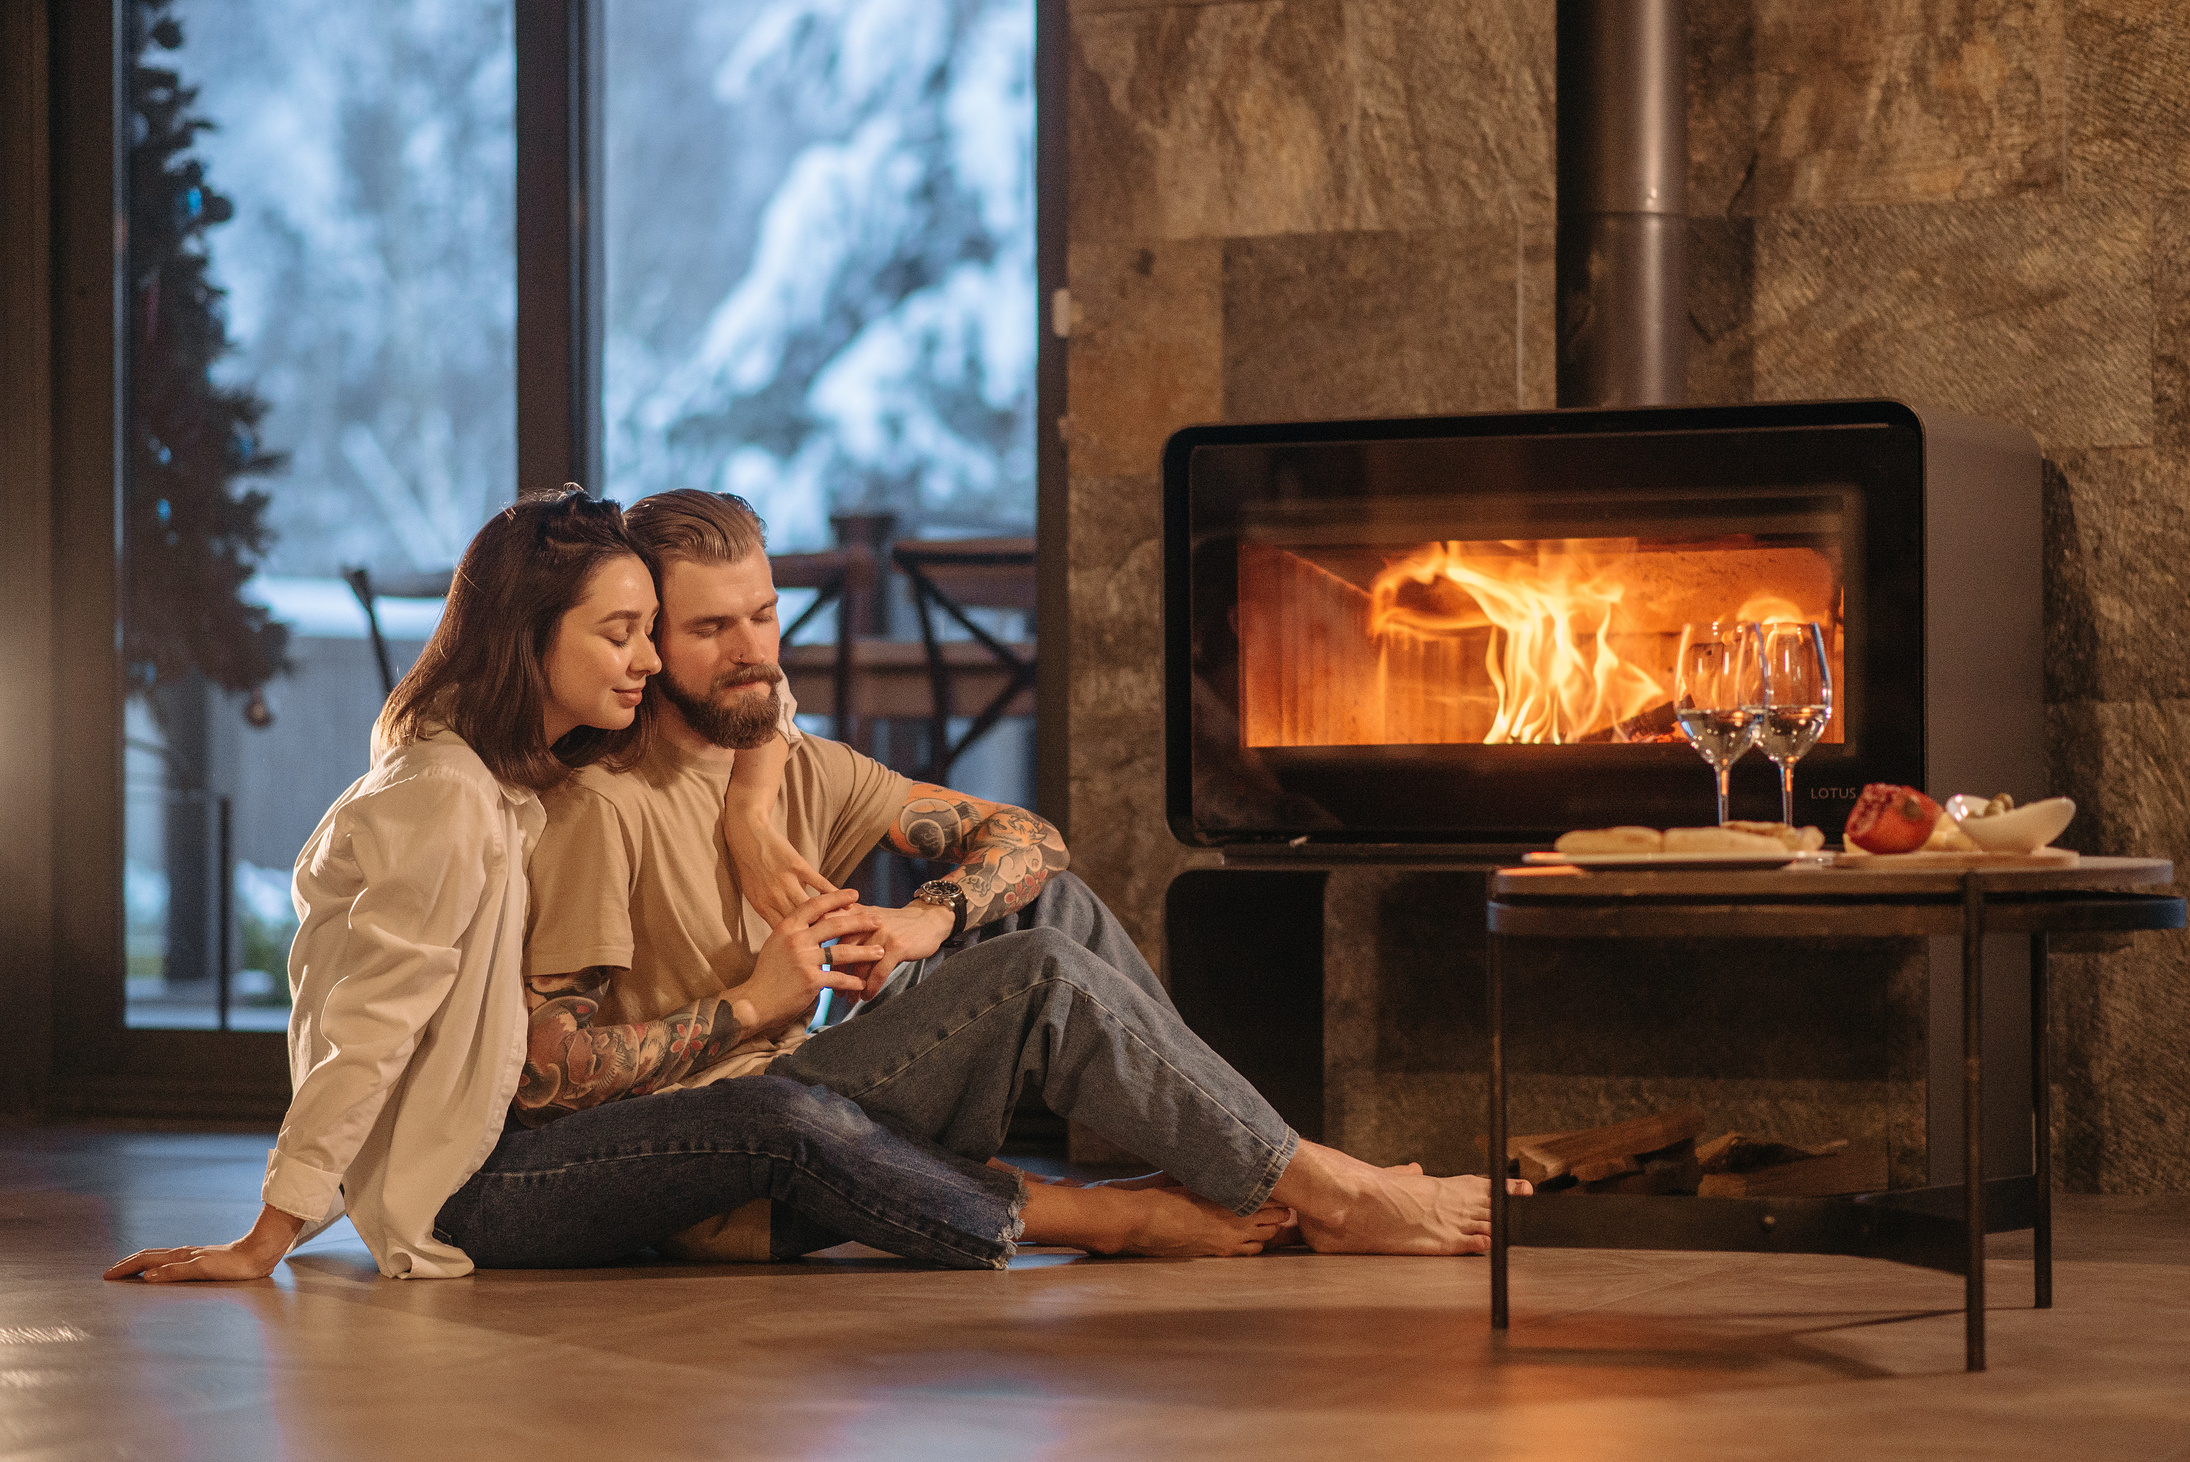 Man and Woman Sitting on Floor Near Fireplace